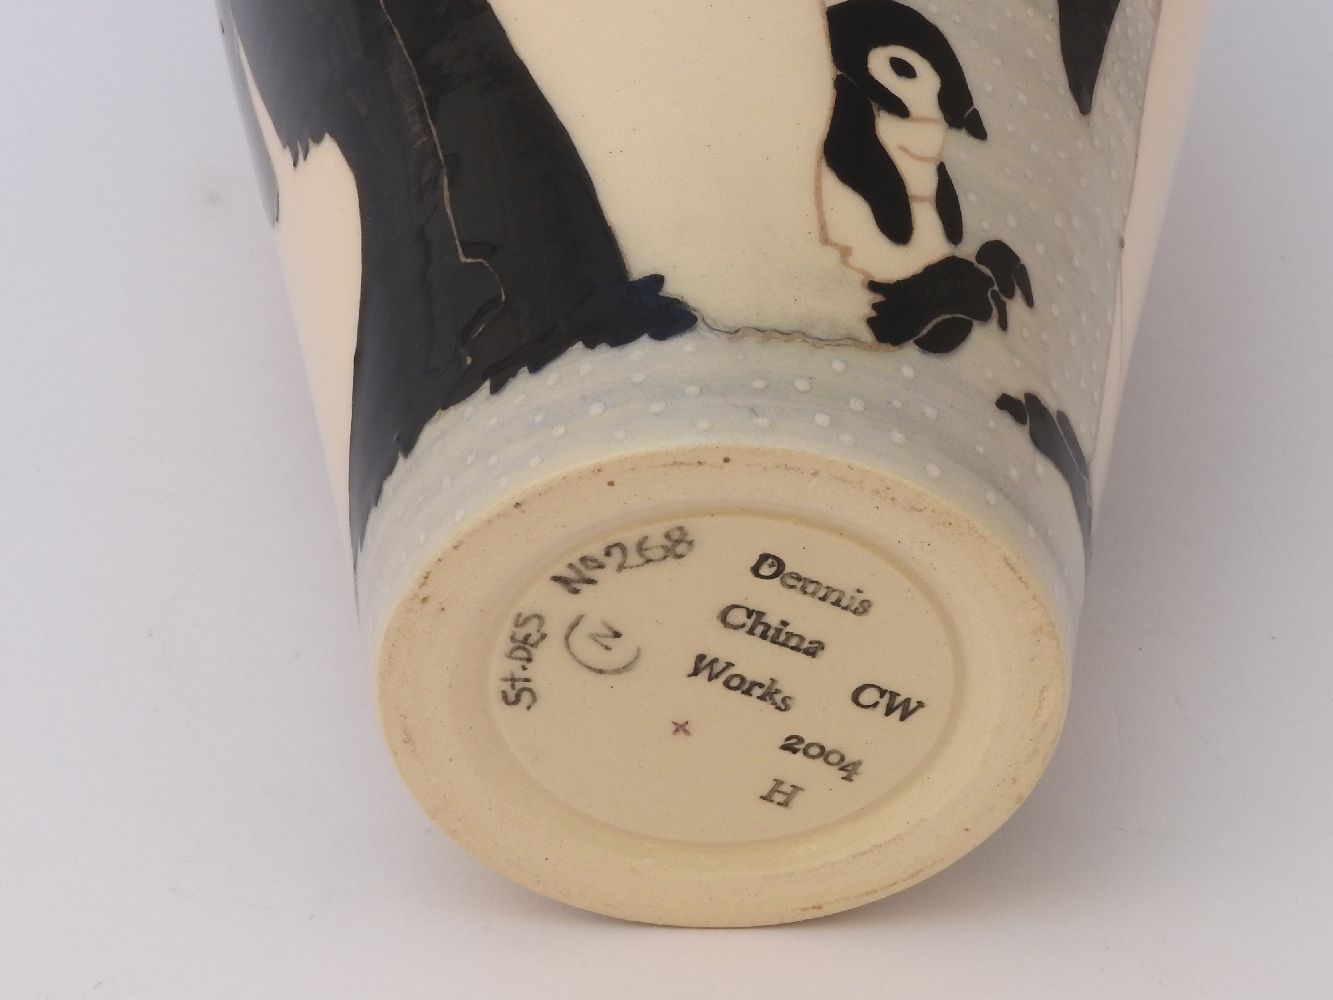 A Dennis Chinaworks pottery Emperor Penguin vase, designed by Sally Tuffin, no 268, 2004, 21cm high - Image 3 of 3